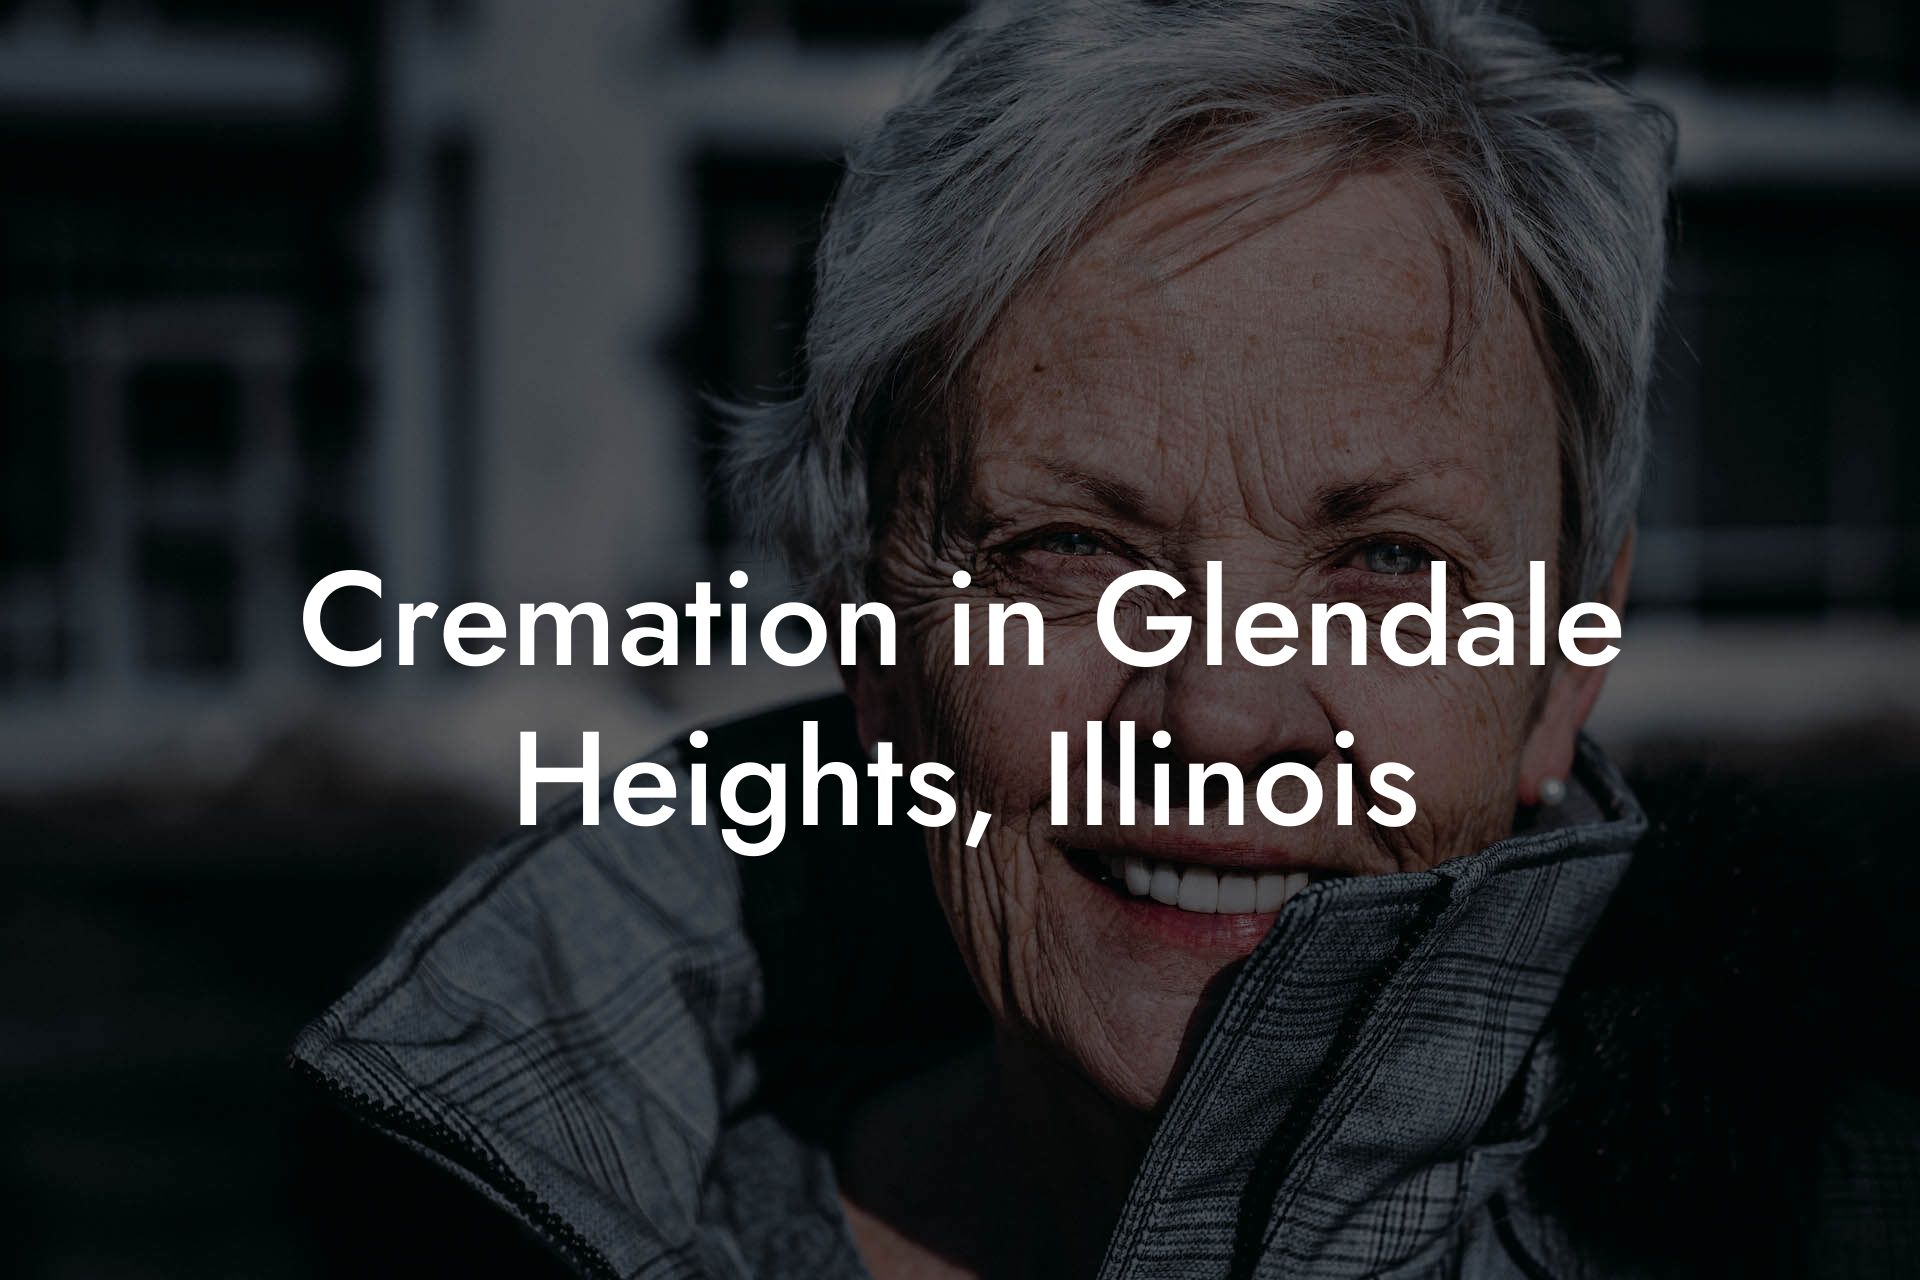 Cremation in Glendale Heights, Illinois